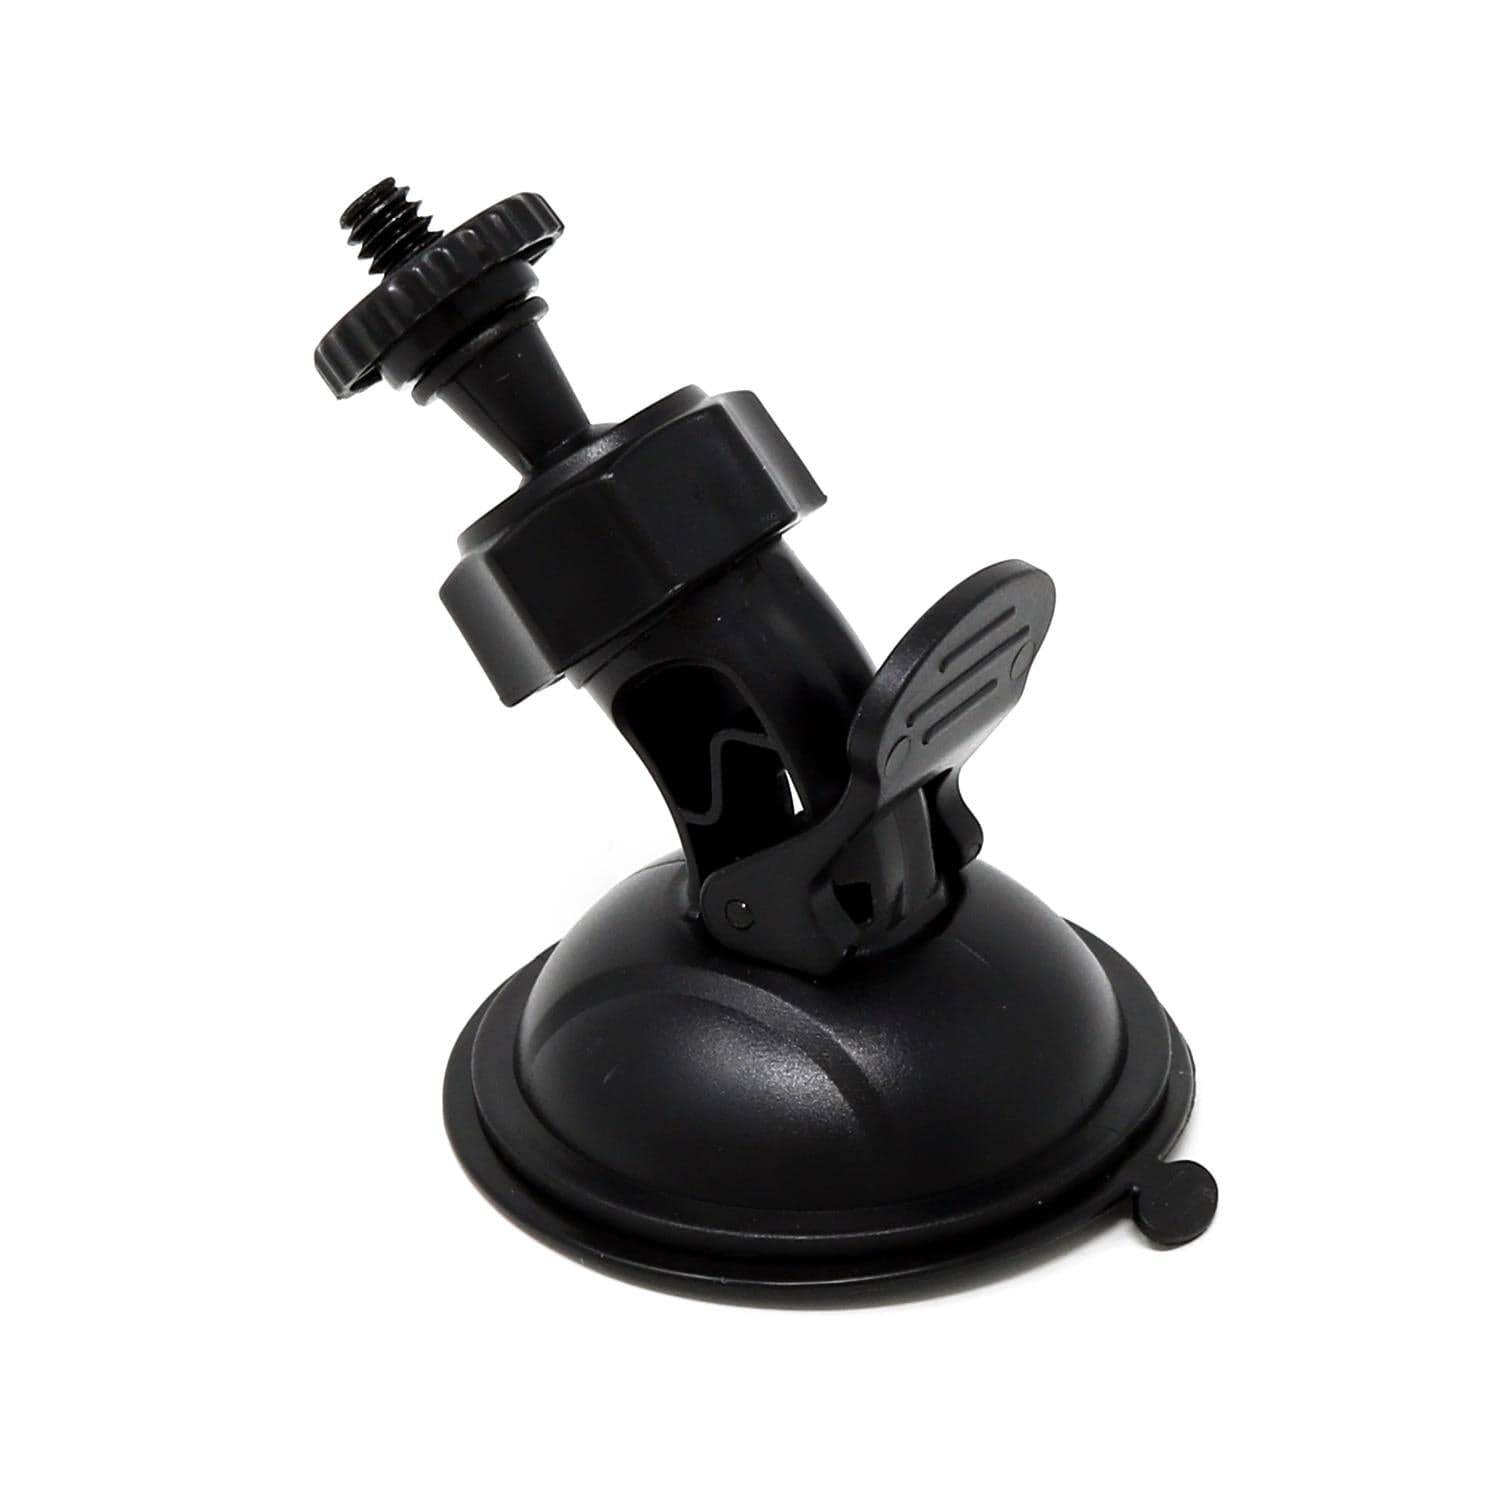 Suction Cup Window Mount for High Quality Camera